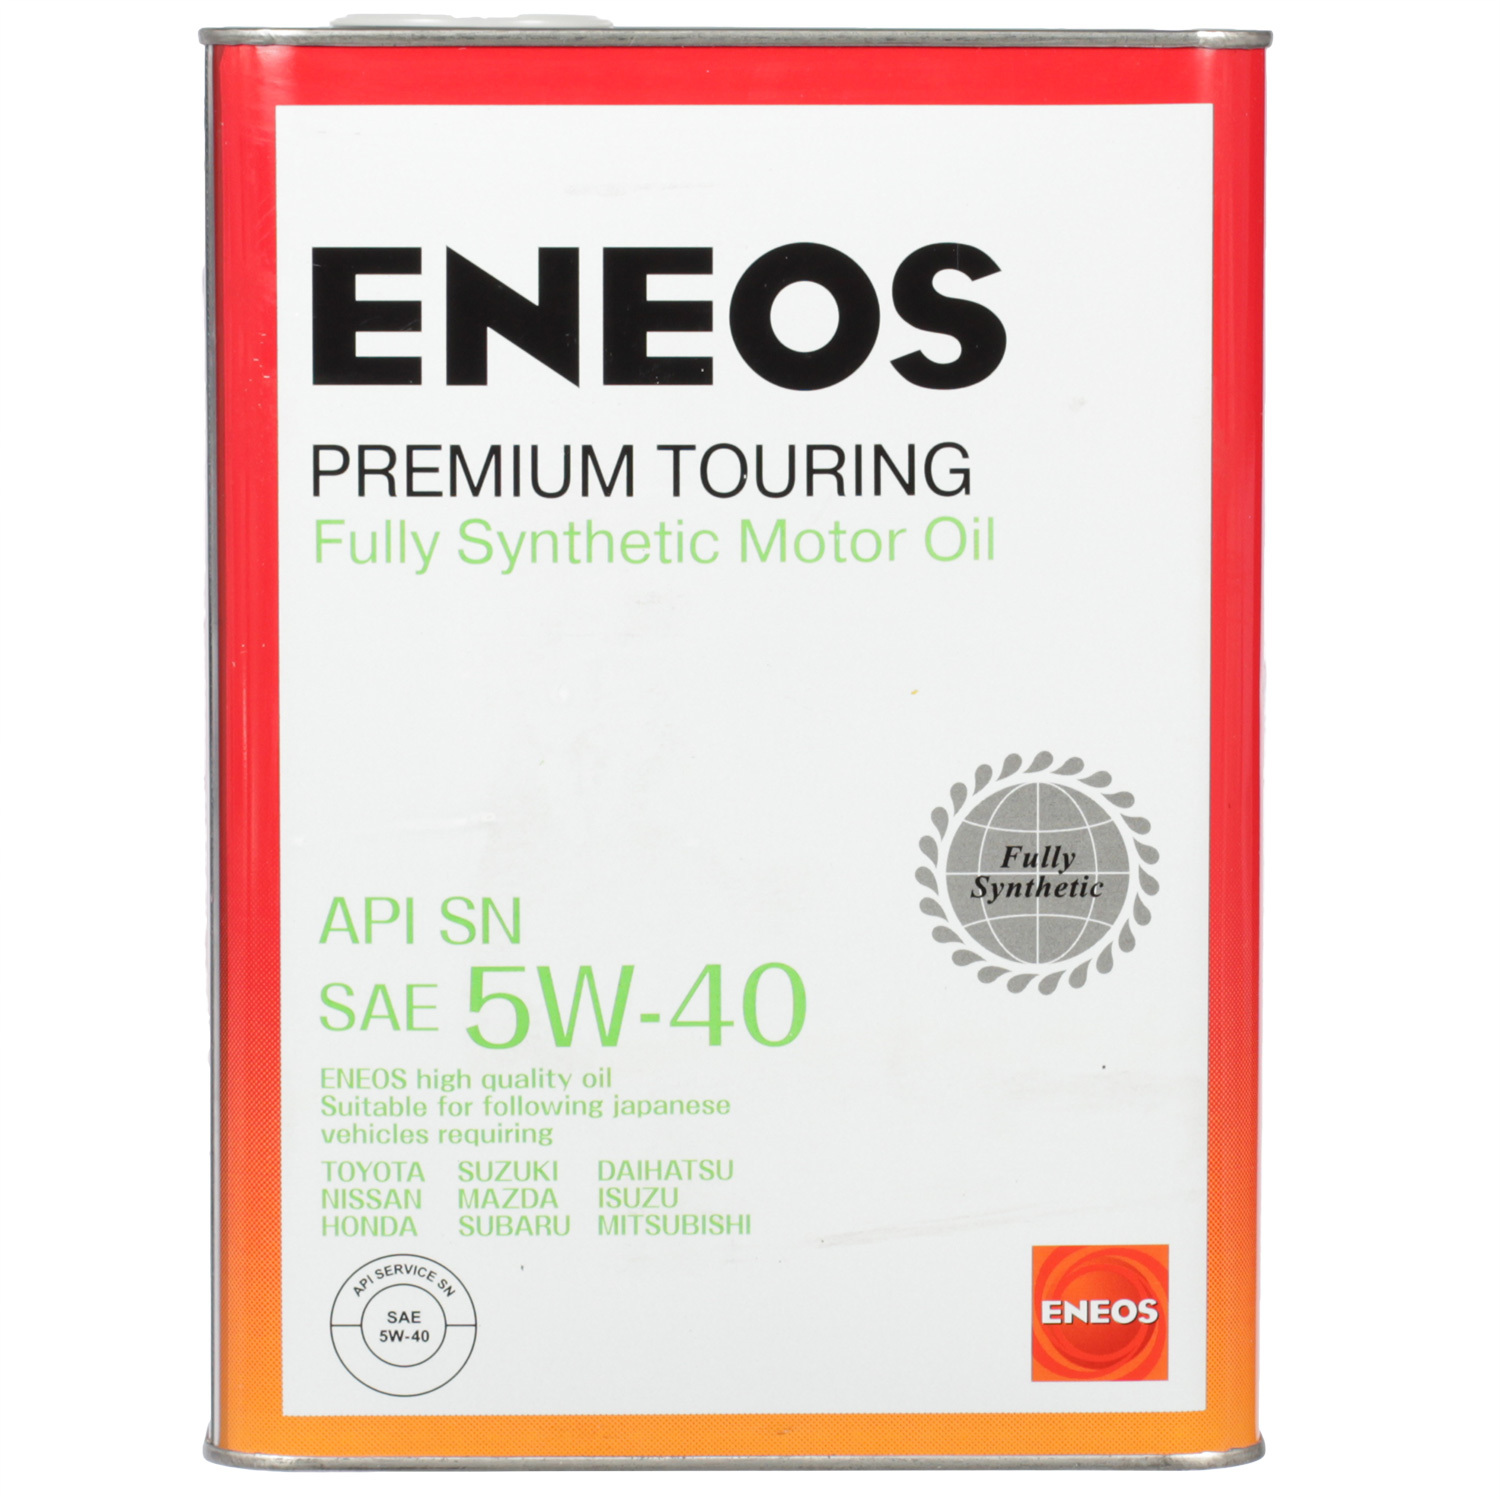 Eneos Моторное масло Eneos Premium TOURING SN 5W-40, 4 л масло моторное totachi grand touring sn cf 5w 40 синтетическое 20 л